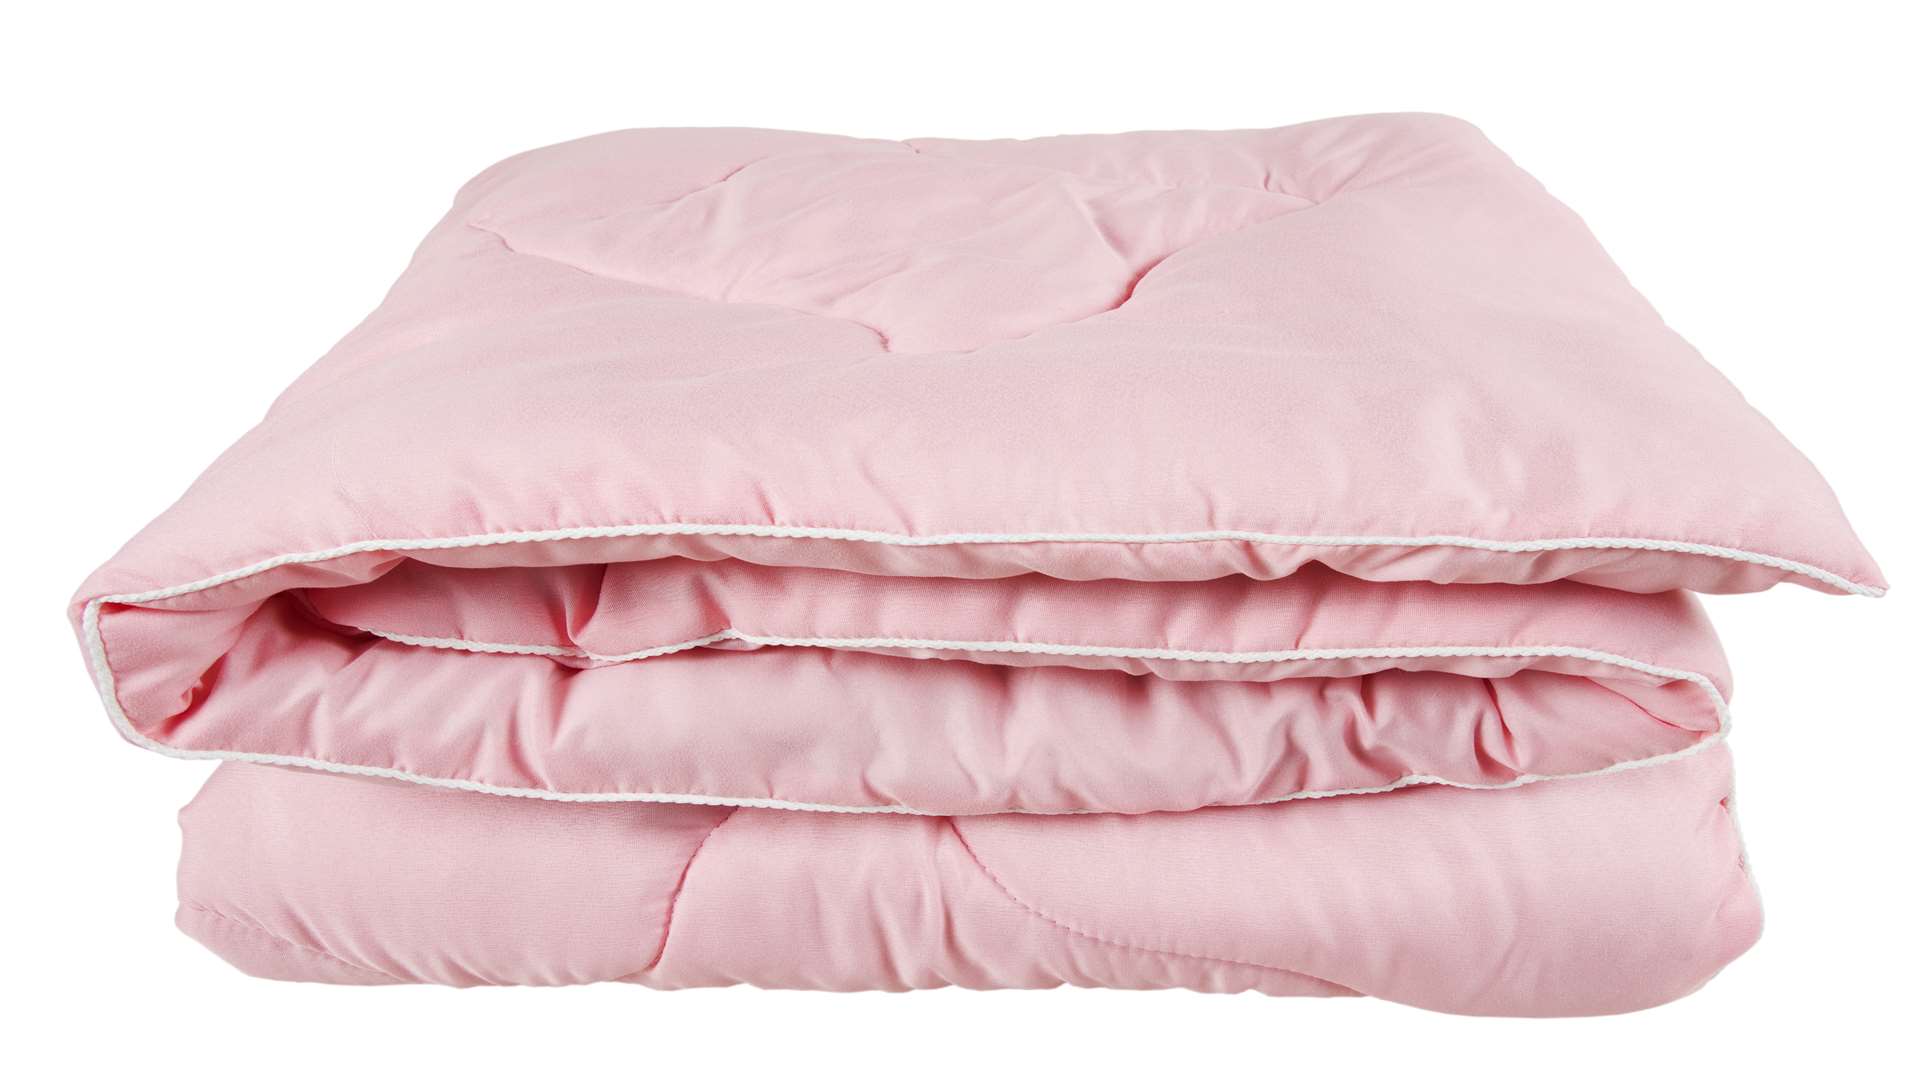 An electric blanket. Library image